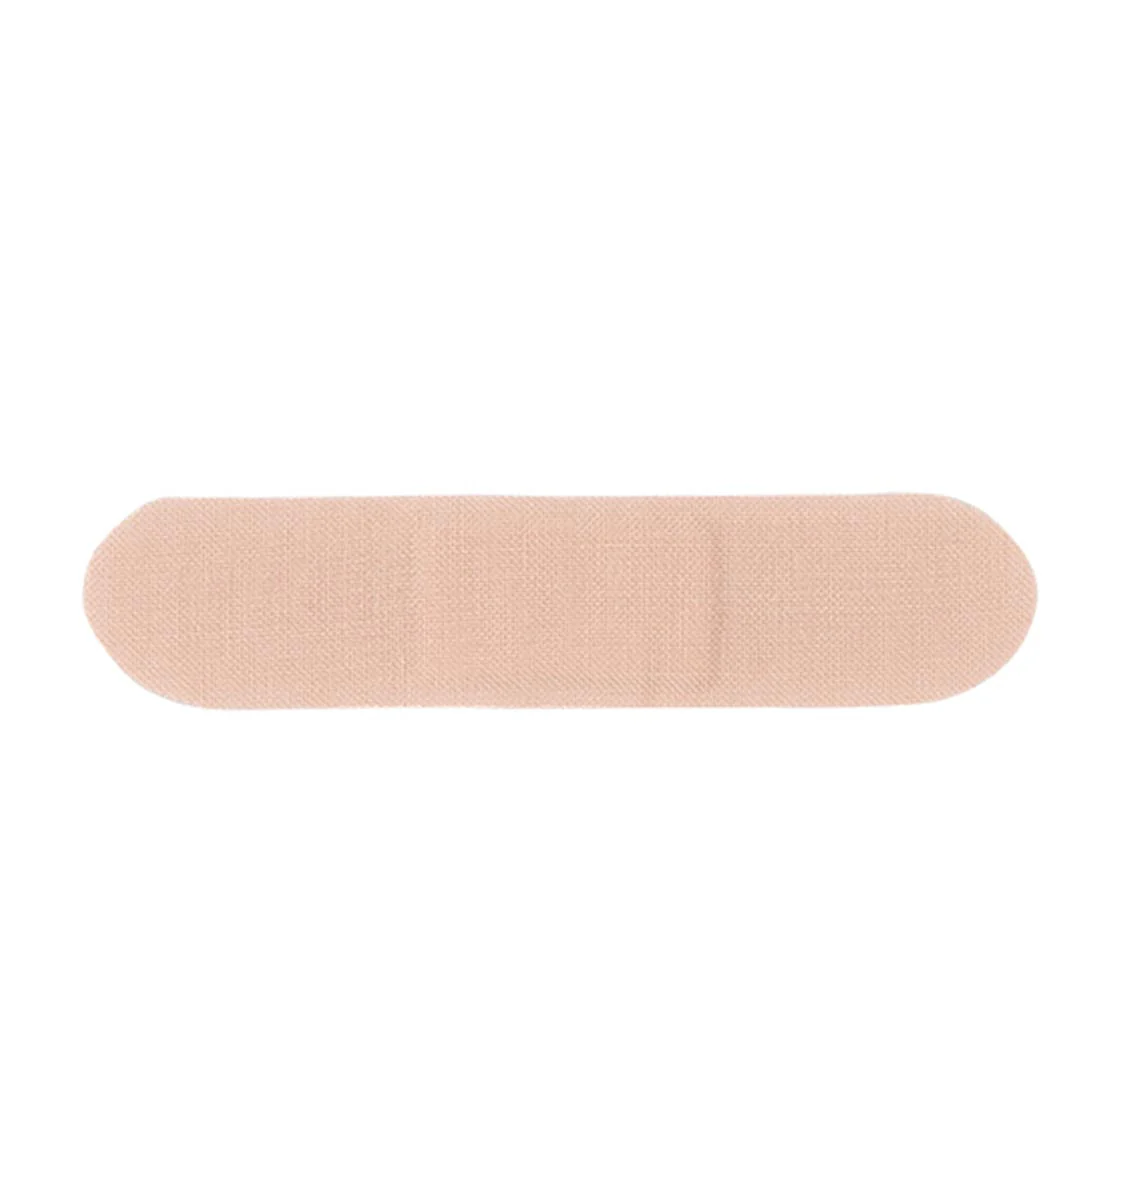 Patch - 100 Natural Bamboo Bandages Value Pack